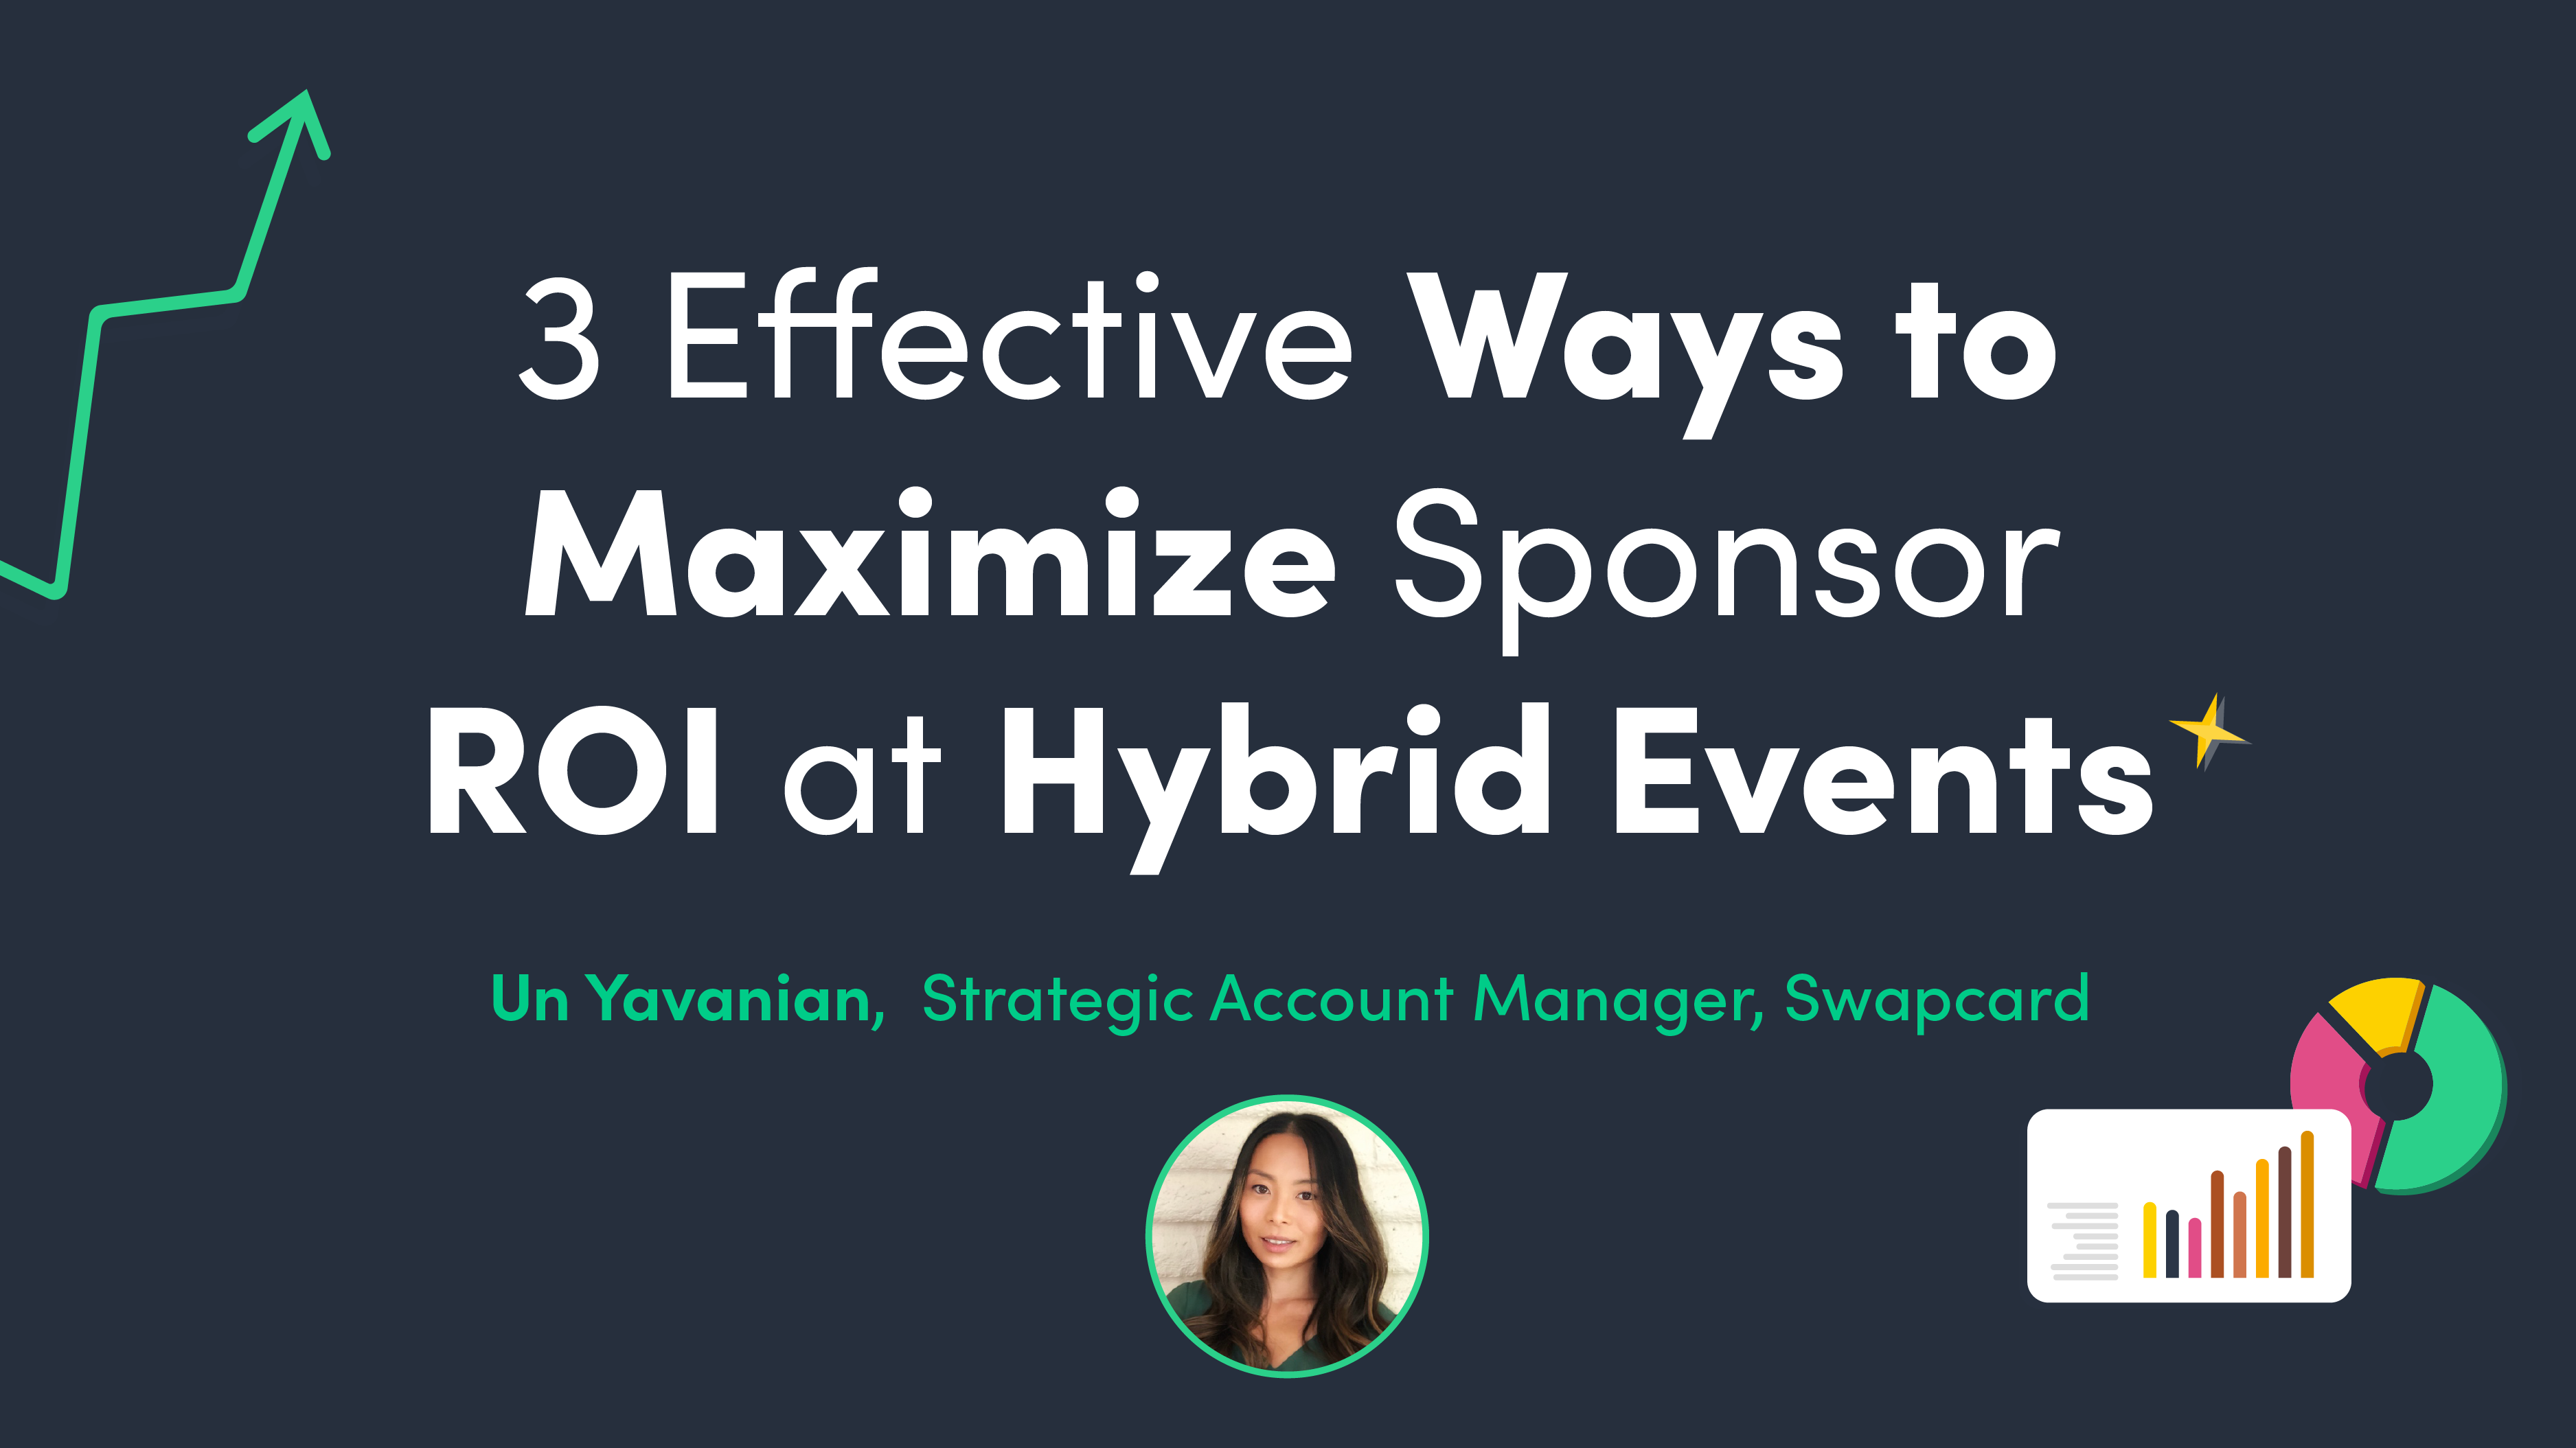 3 Effective Ways to Maximize Sponsor ROI at Hybrid Events